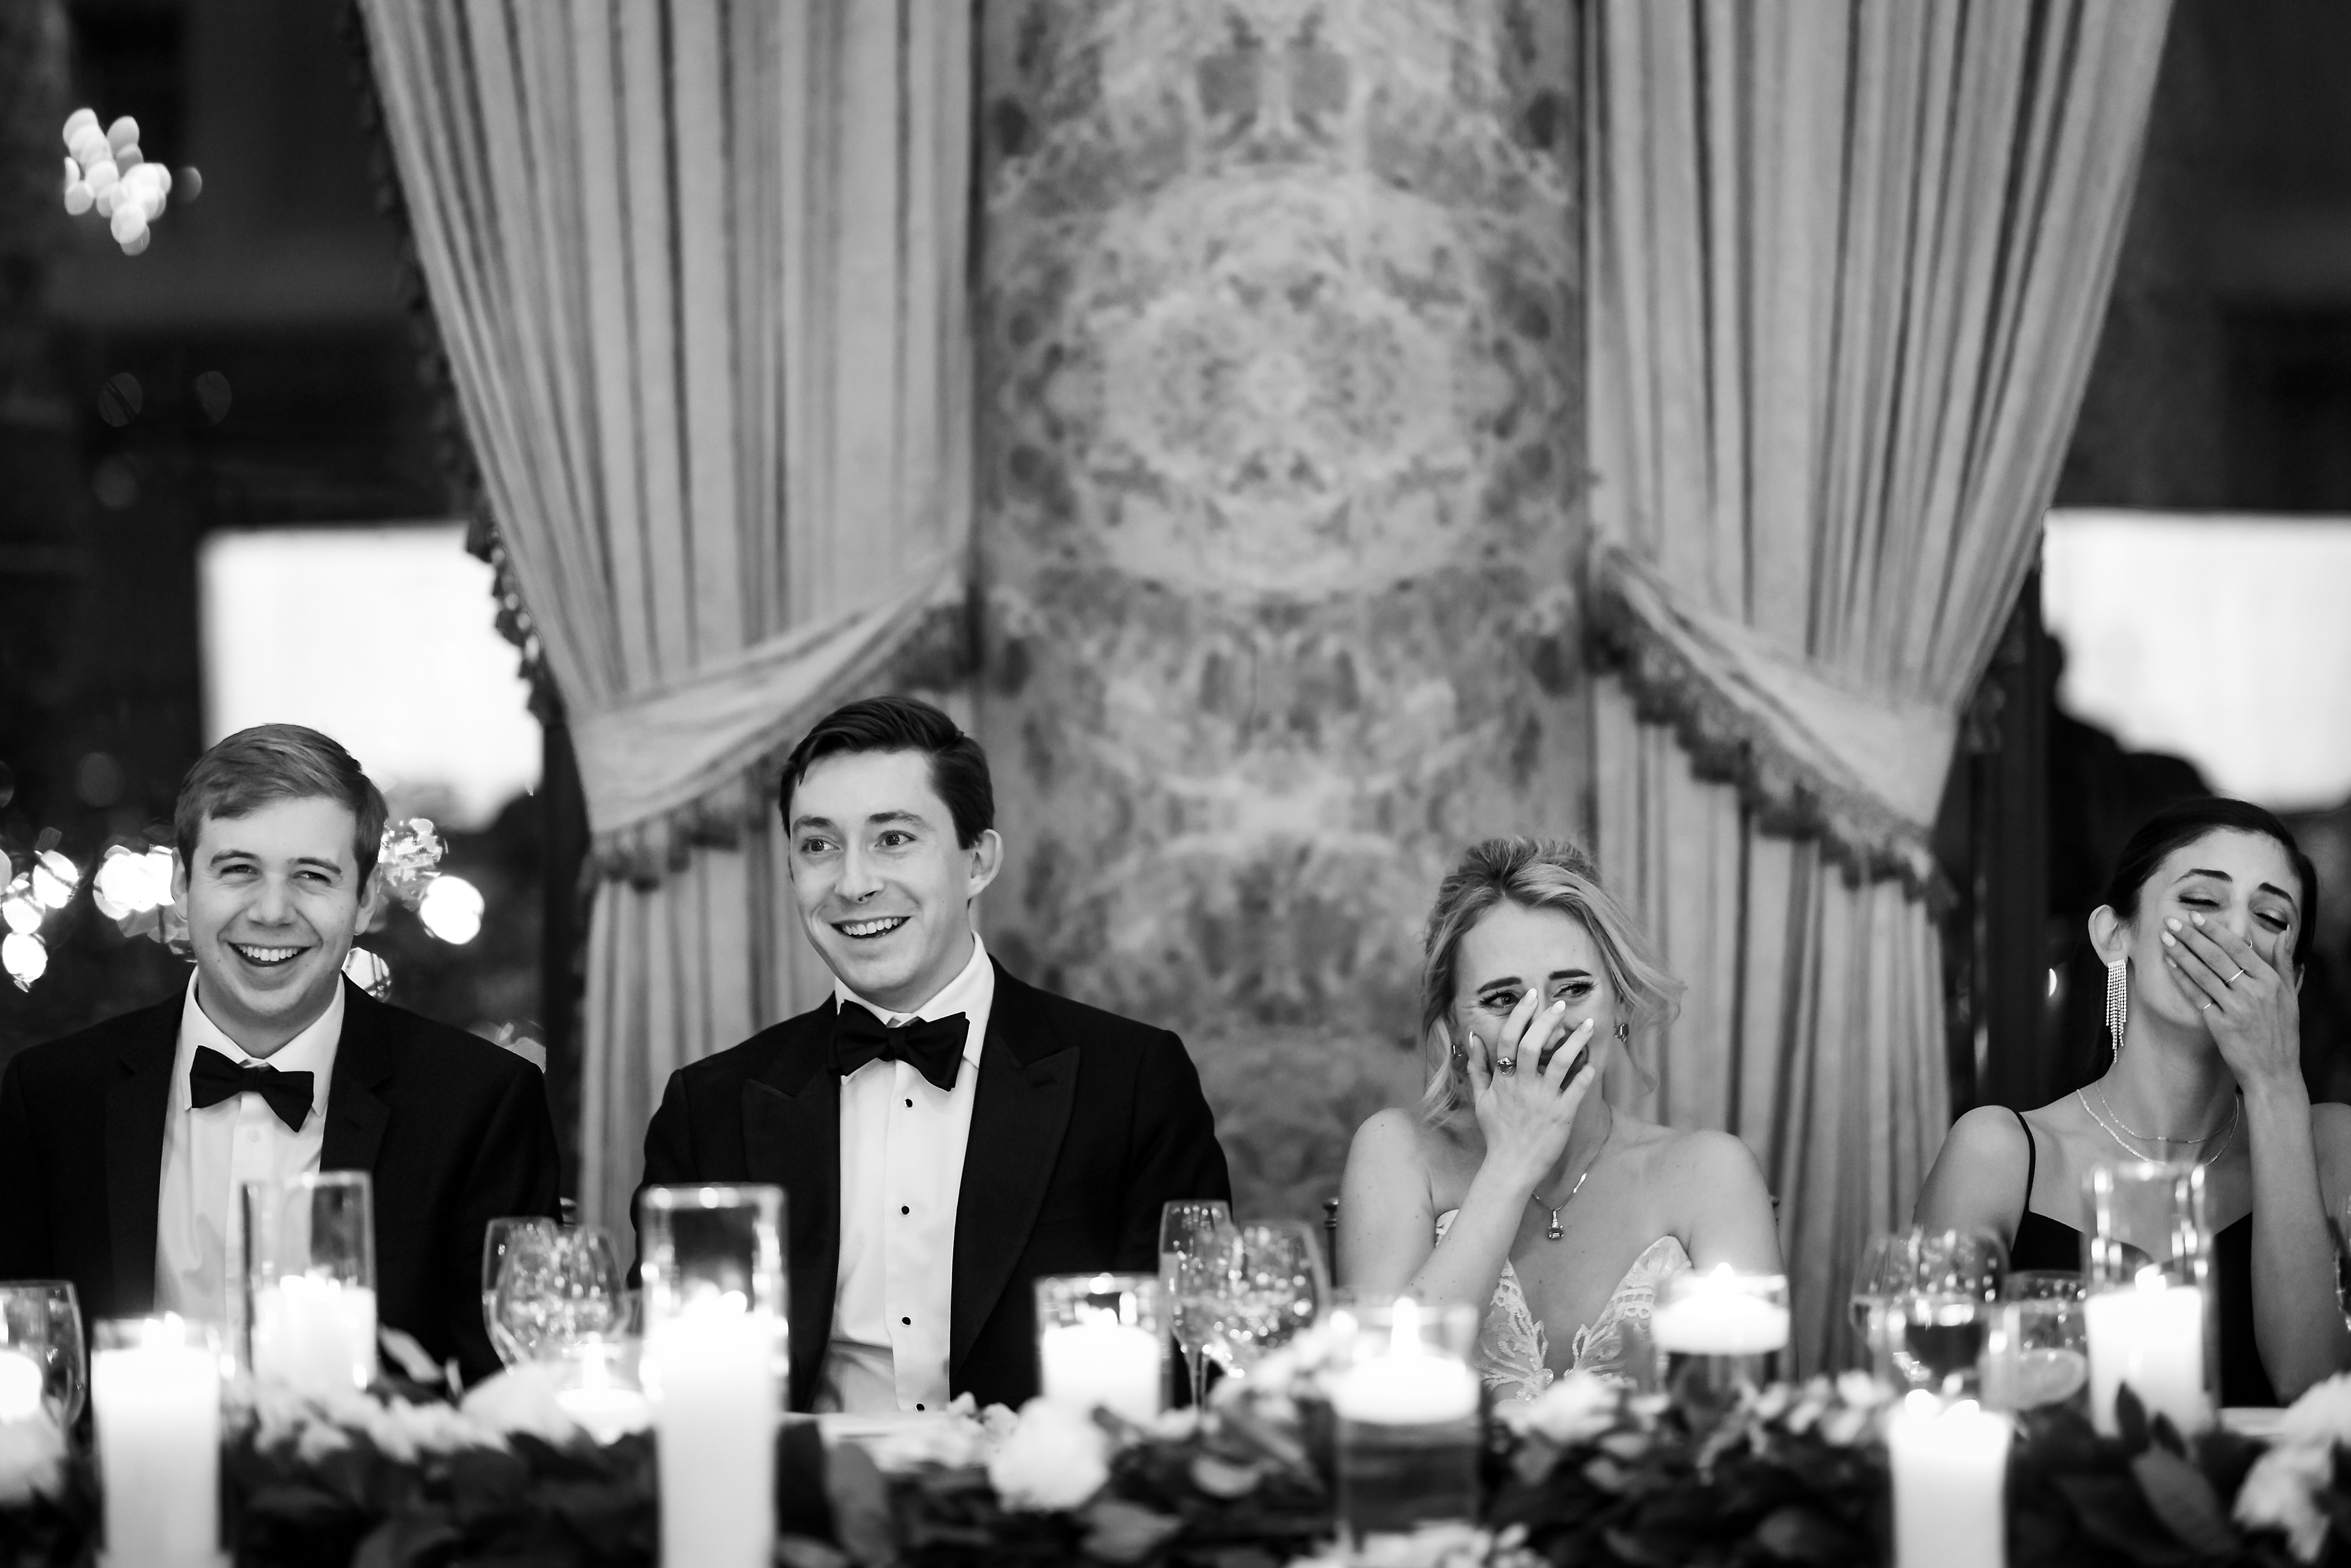 Wedding party reacts to toast during wedding reception in the Grand Ballroom at The Drake Hotel in Chicago